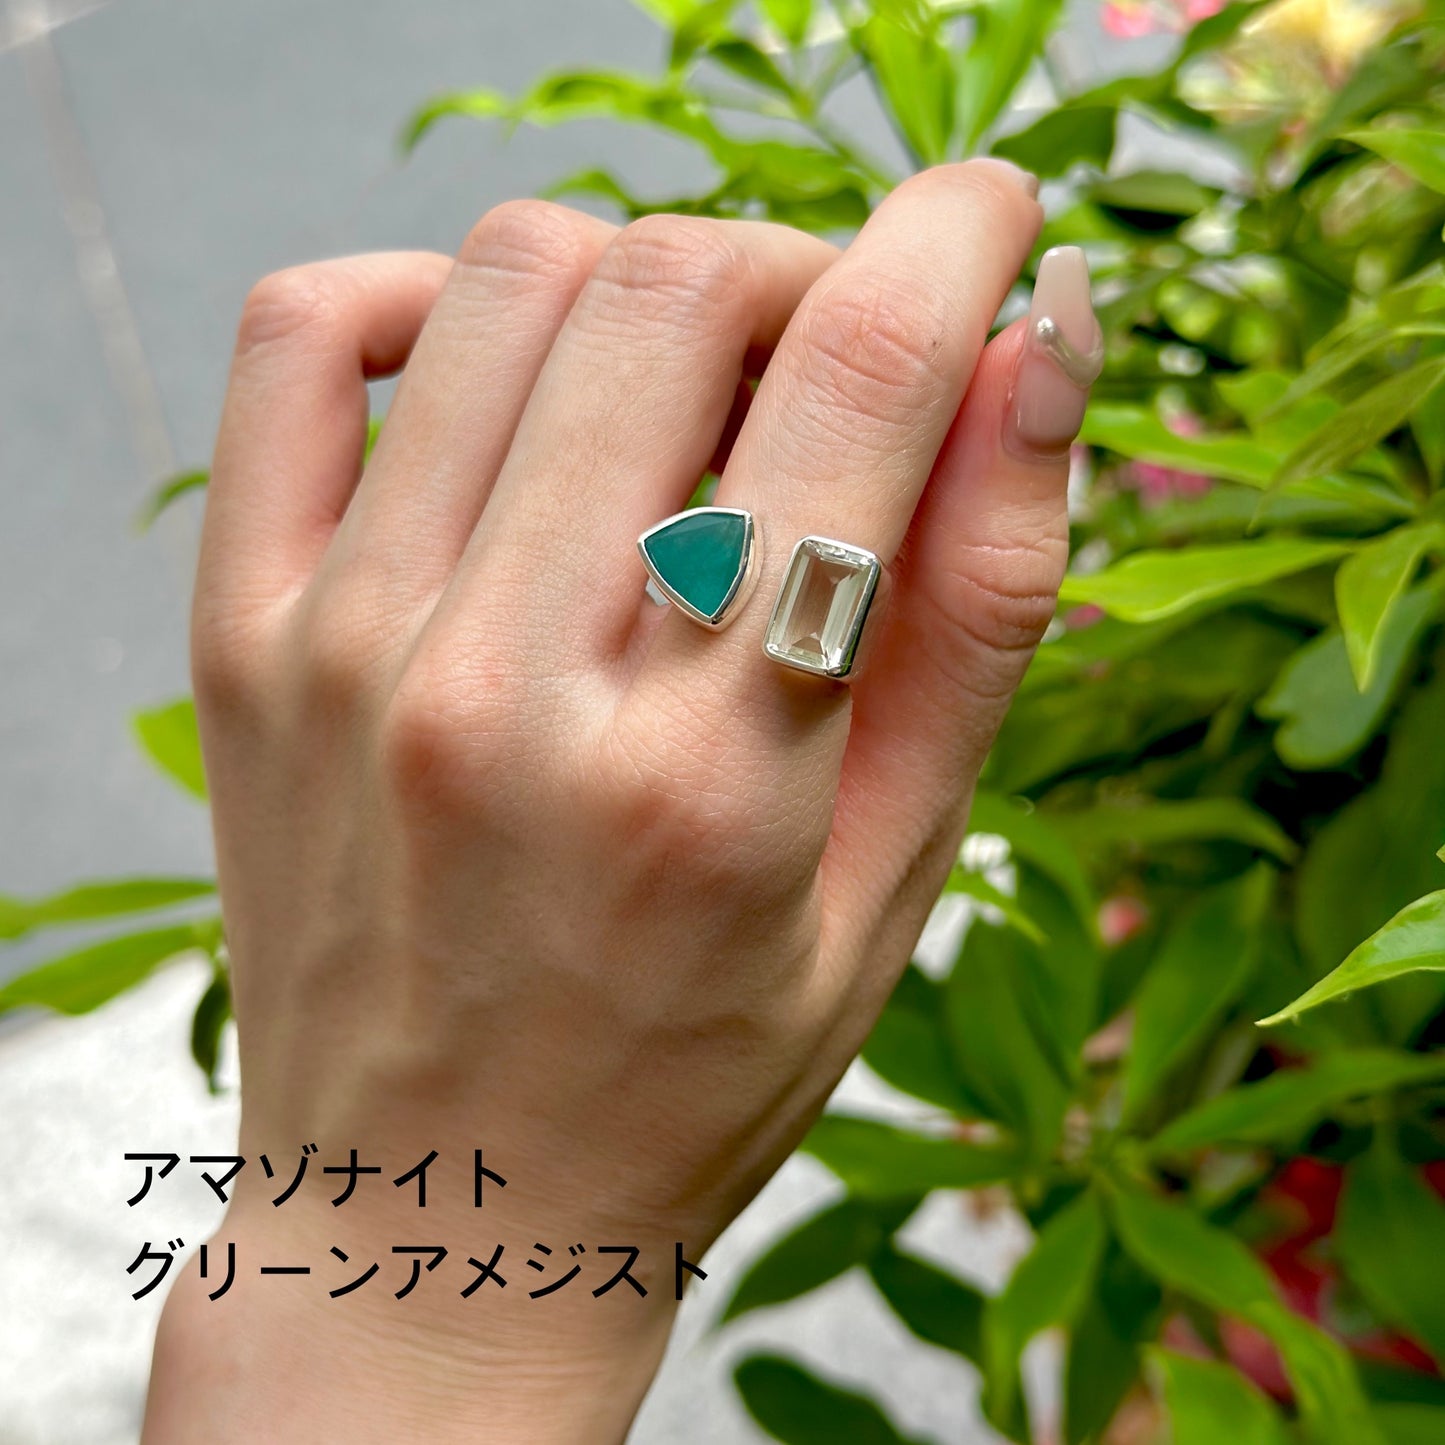 Silver925 2stone ring 9